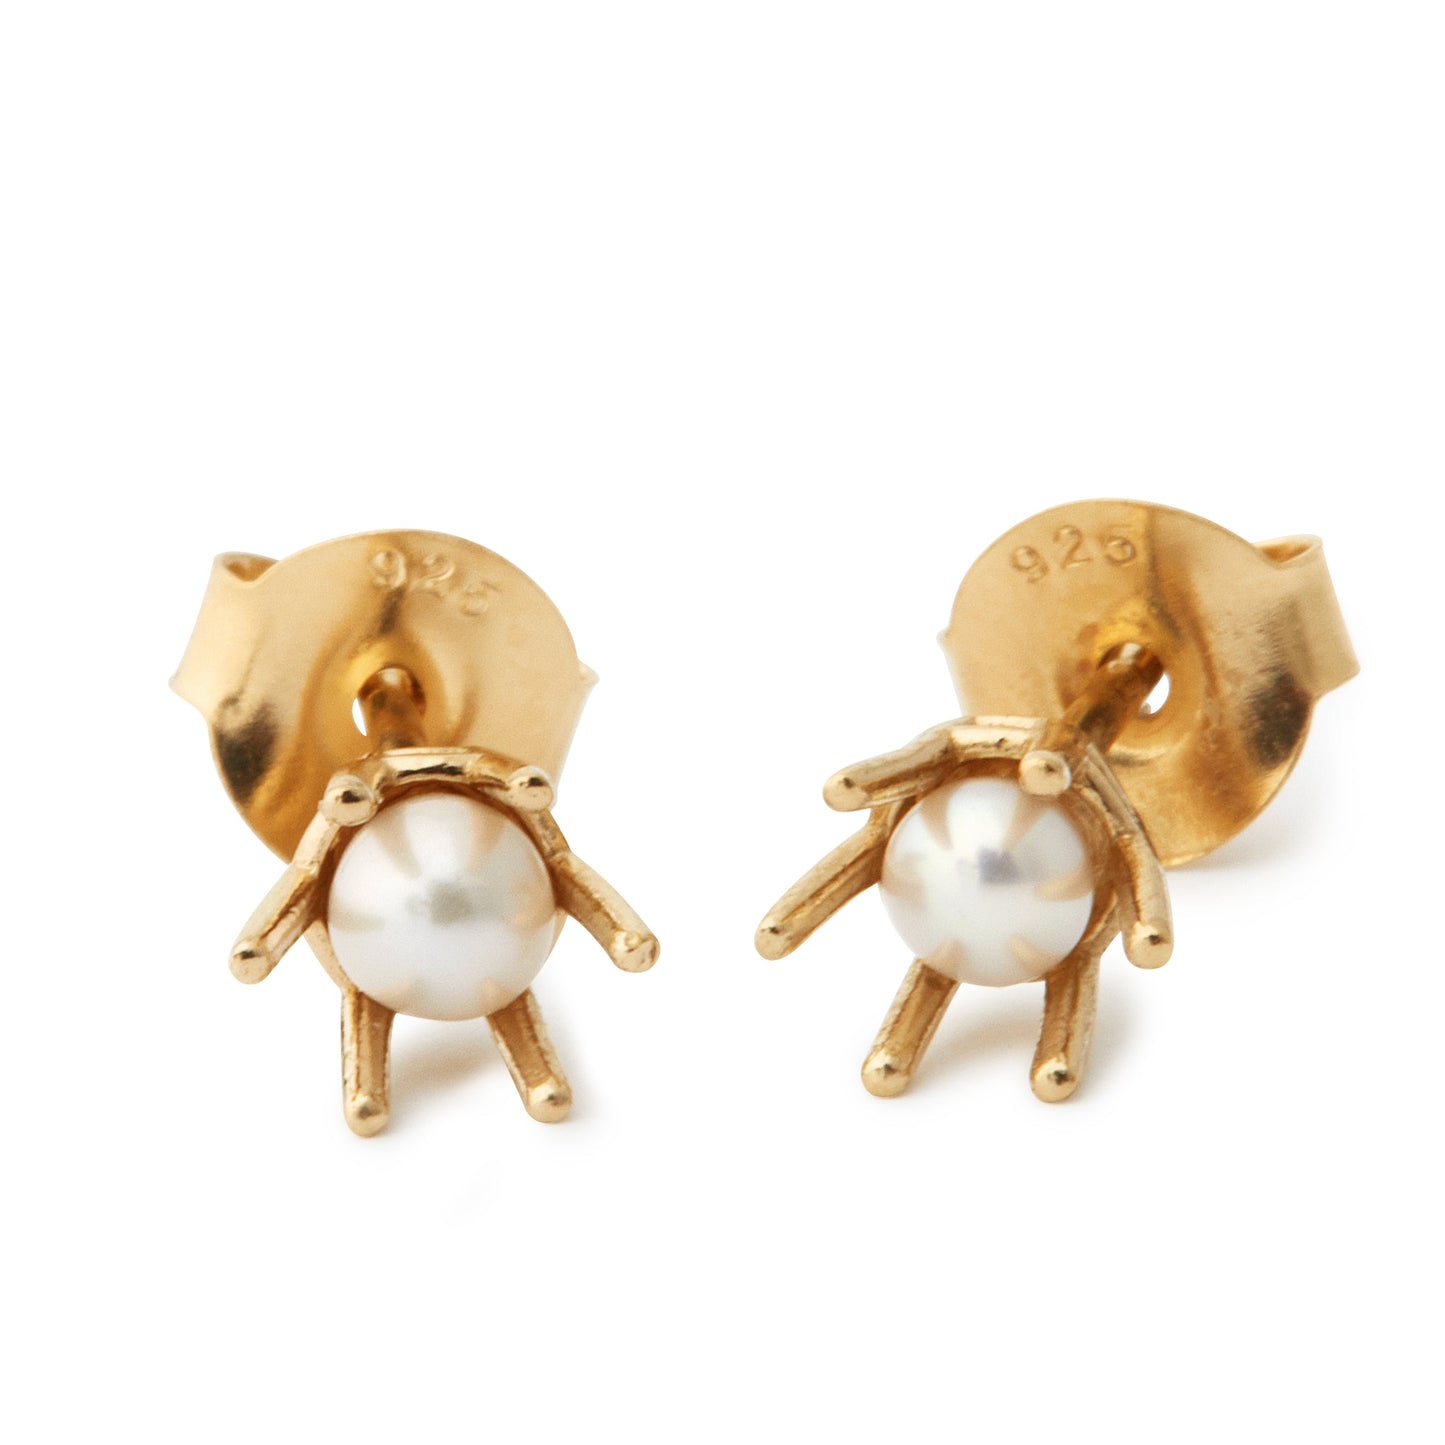 One Pearl Earring - Gold Plated Silver